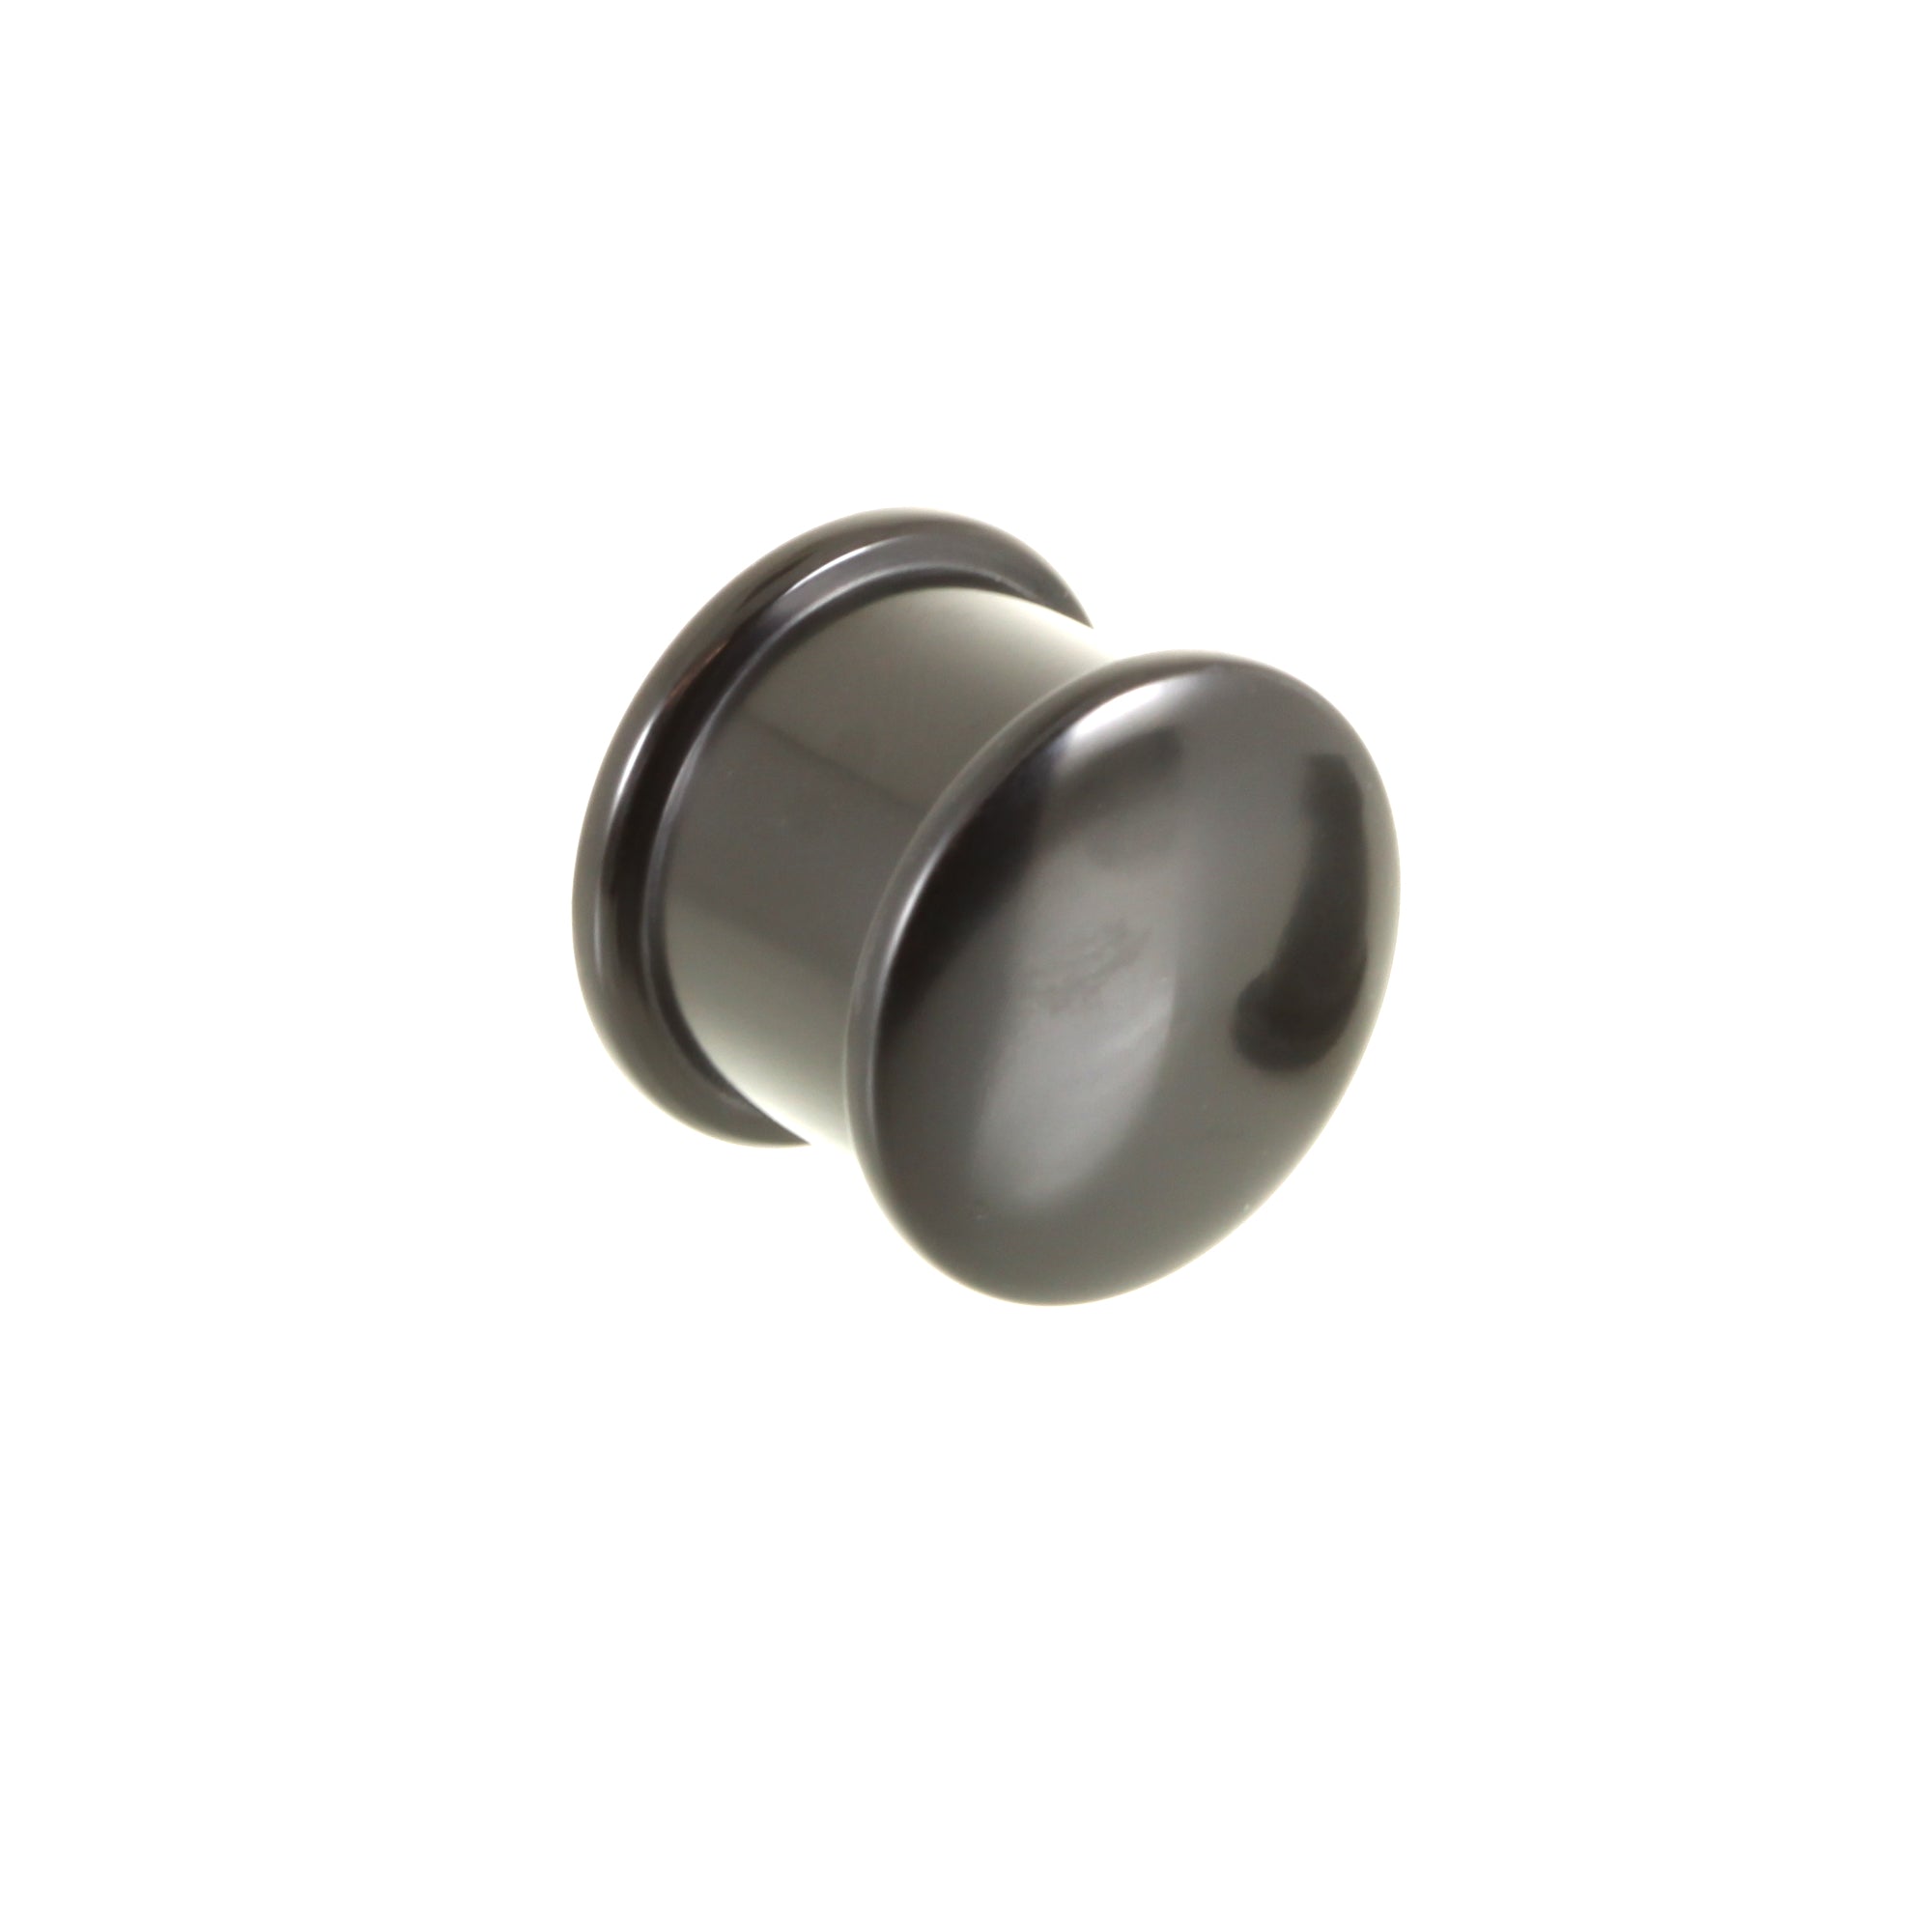 Delrin Double Flare Threaded Plug | 1 Piece